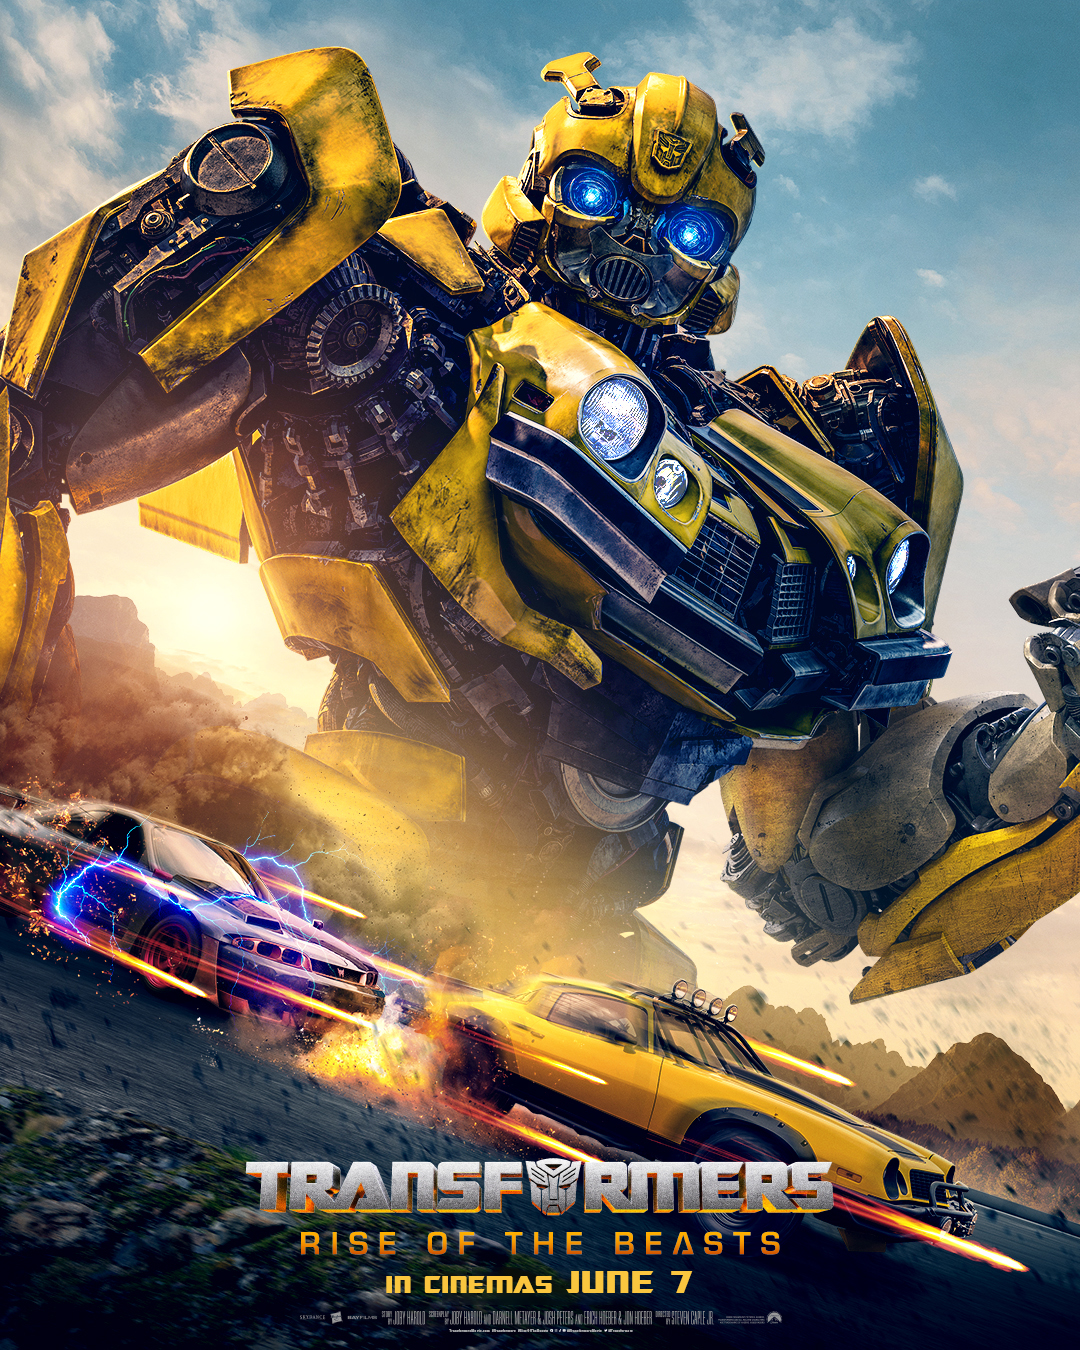 Meet the characters of “TRANSFORMERS: RISE OF THE BEASTS” 